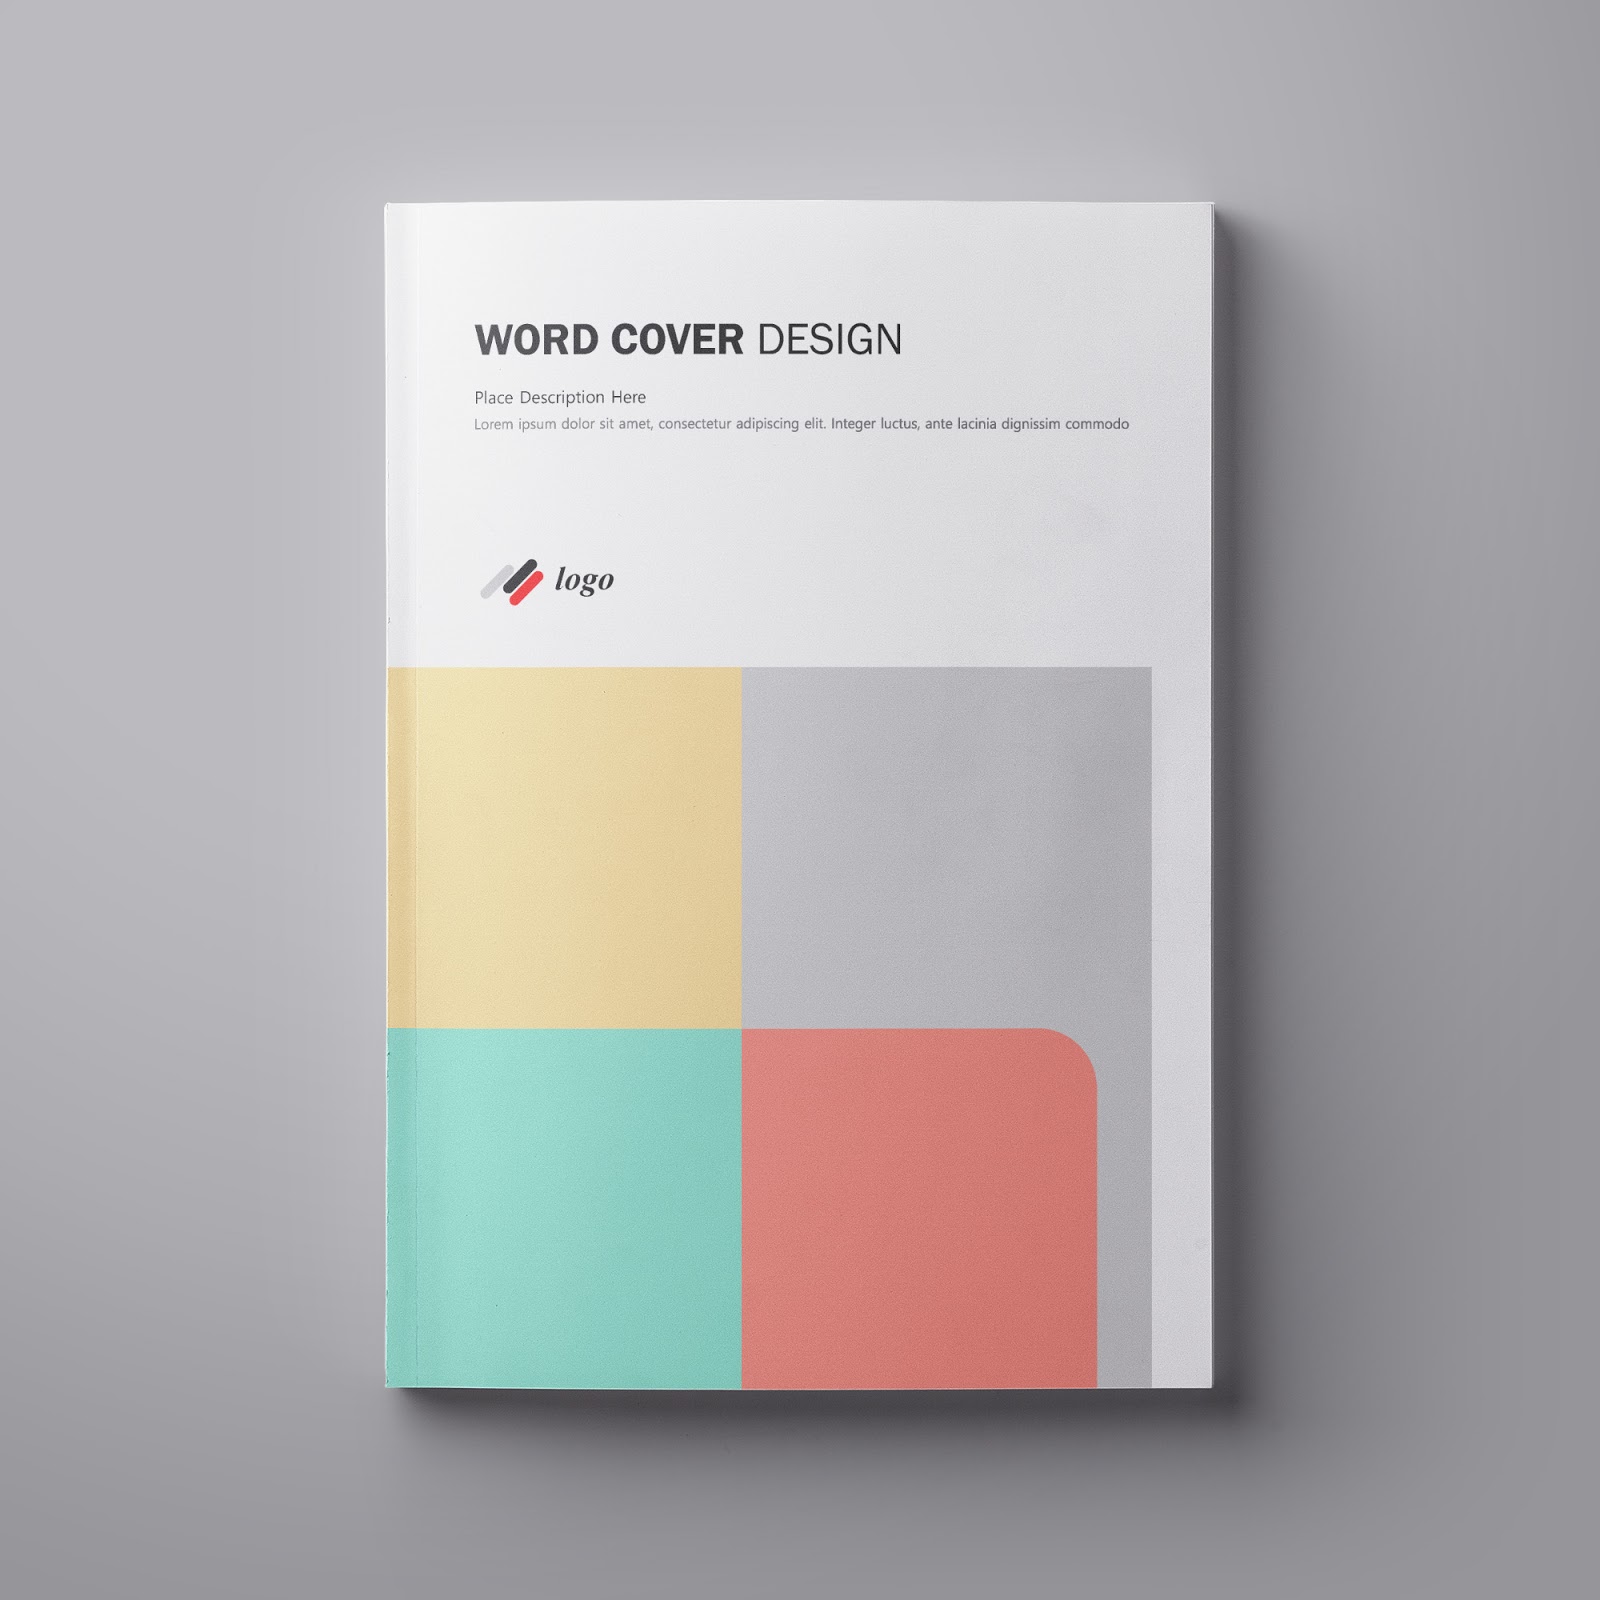 Microsoft Word Cover Templates | 82 Free Download - Word Free